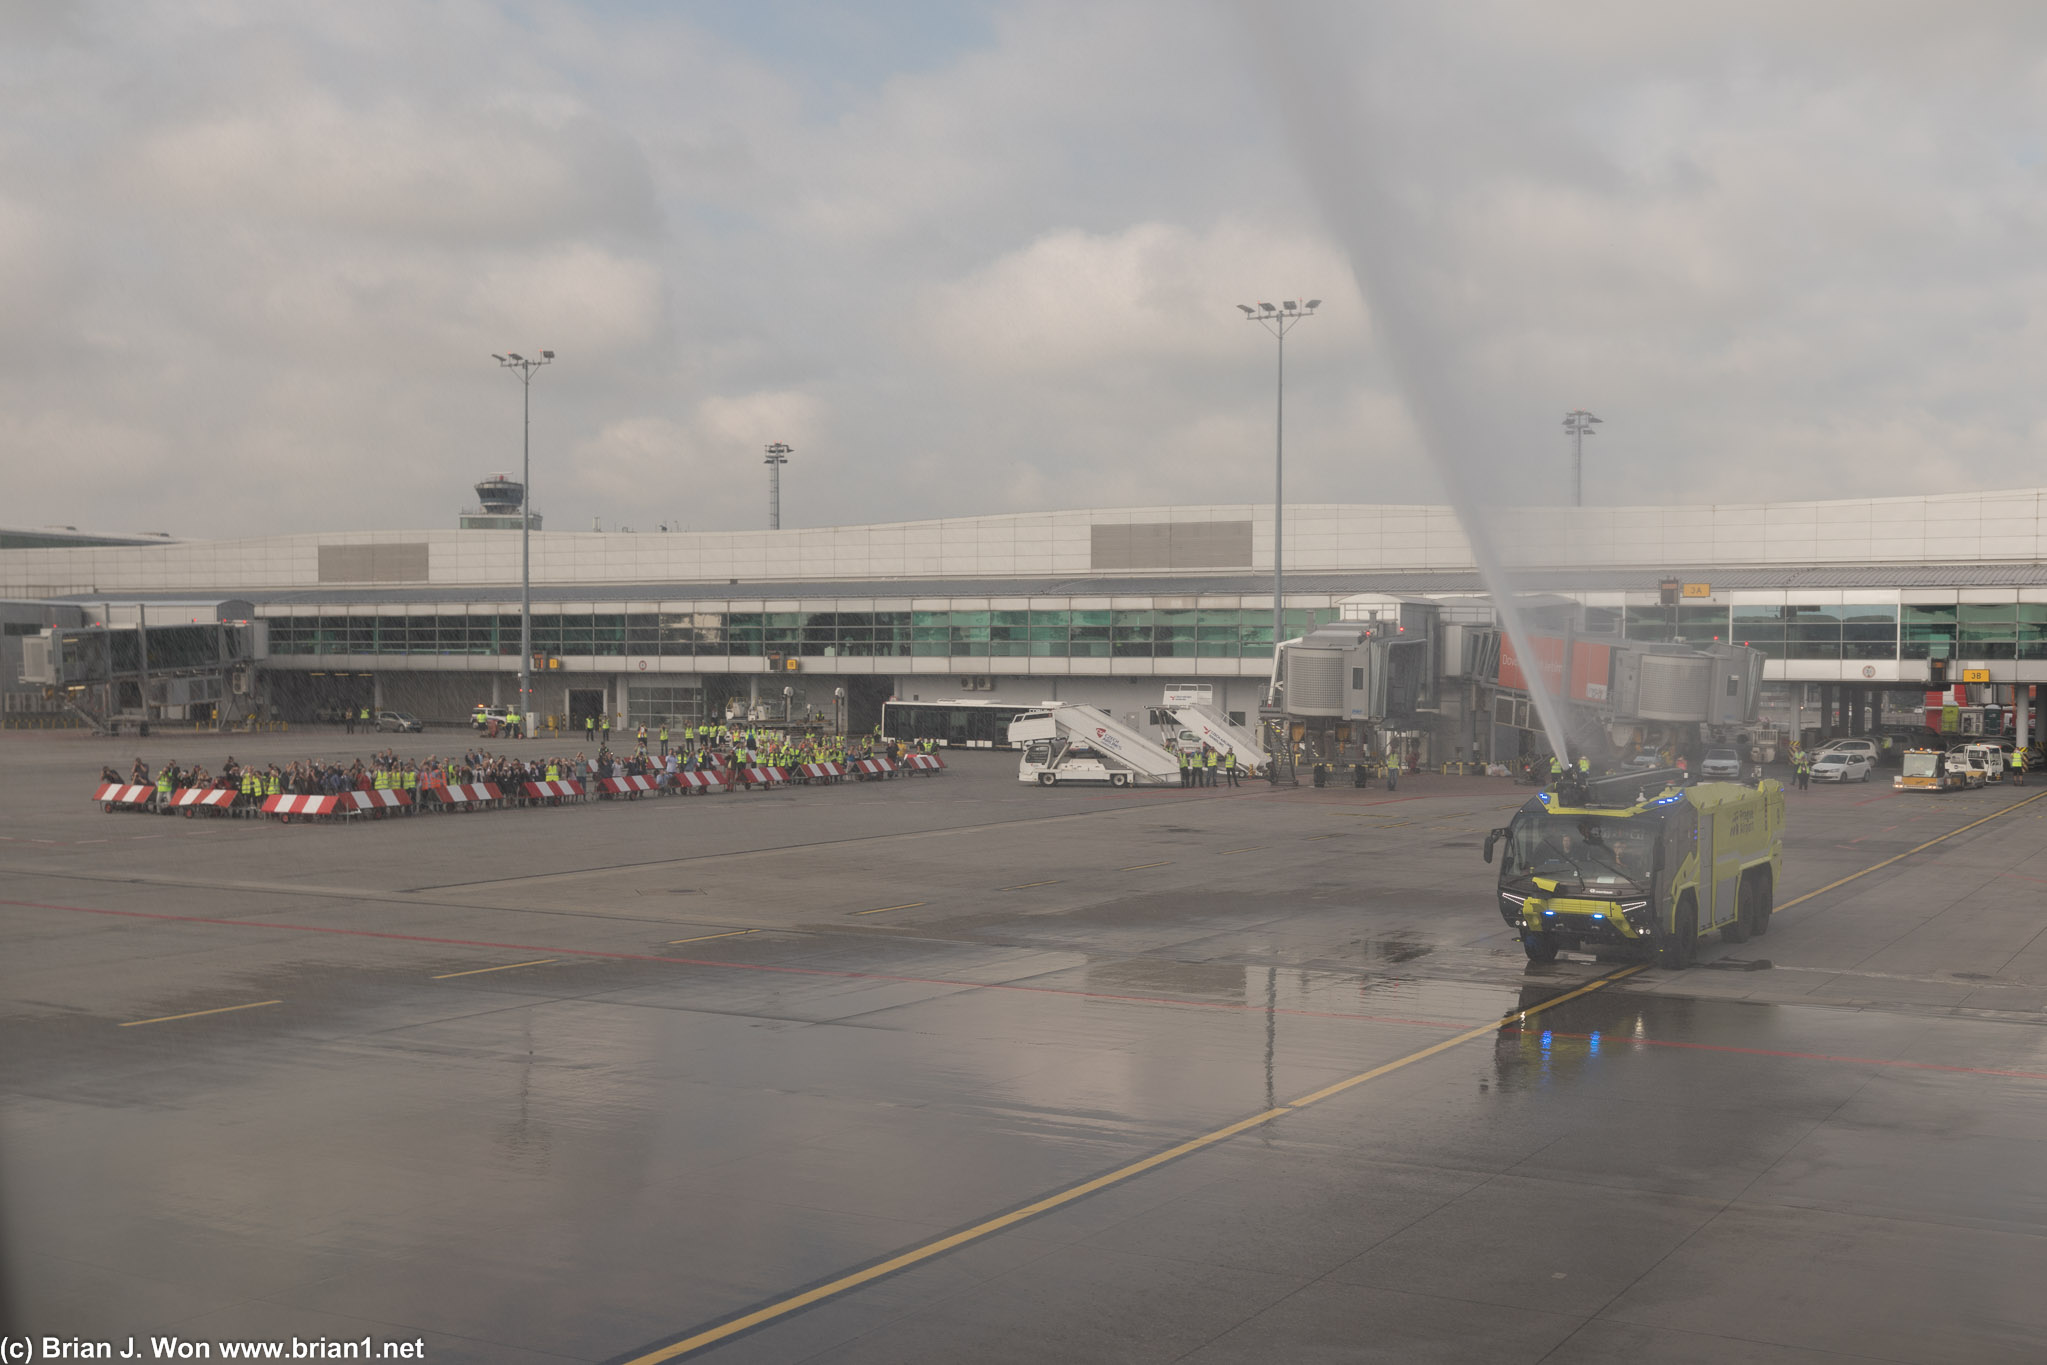 Water cannon salute for the inaugural United EWR-PRG flight.